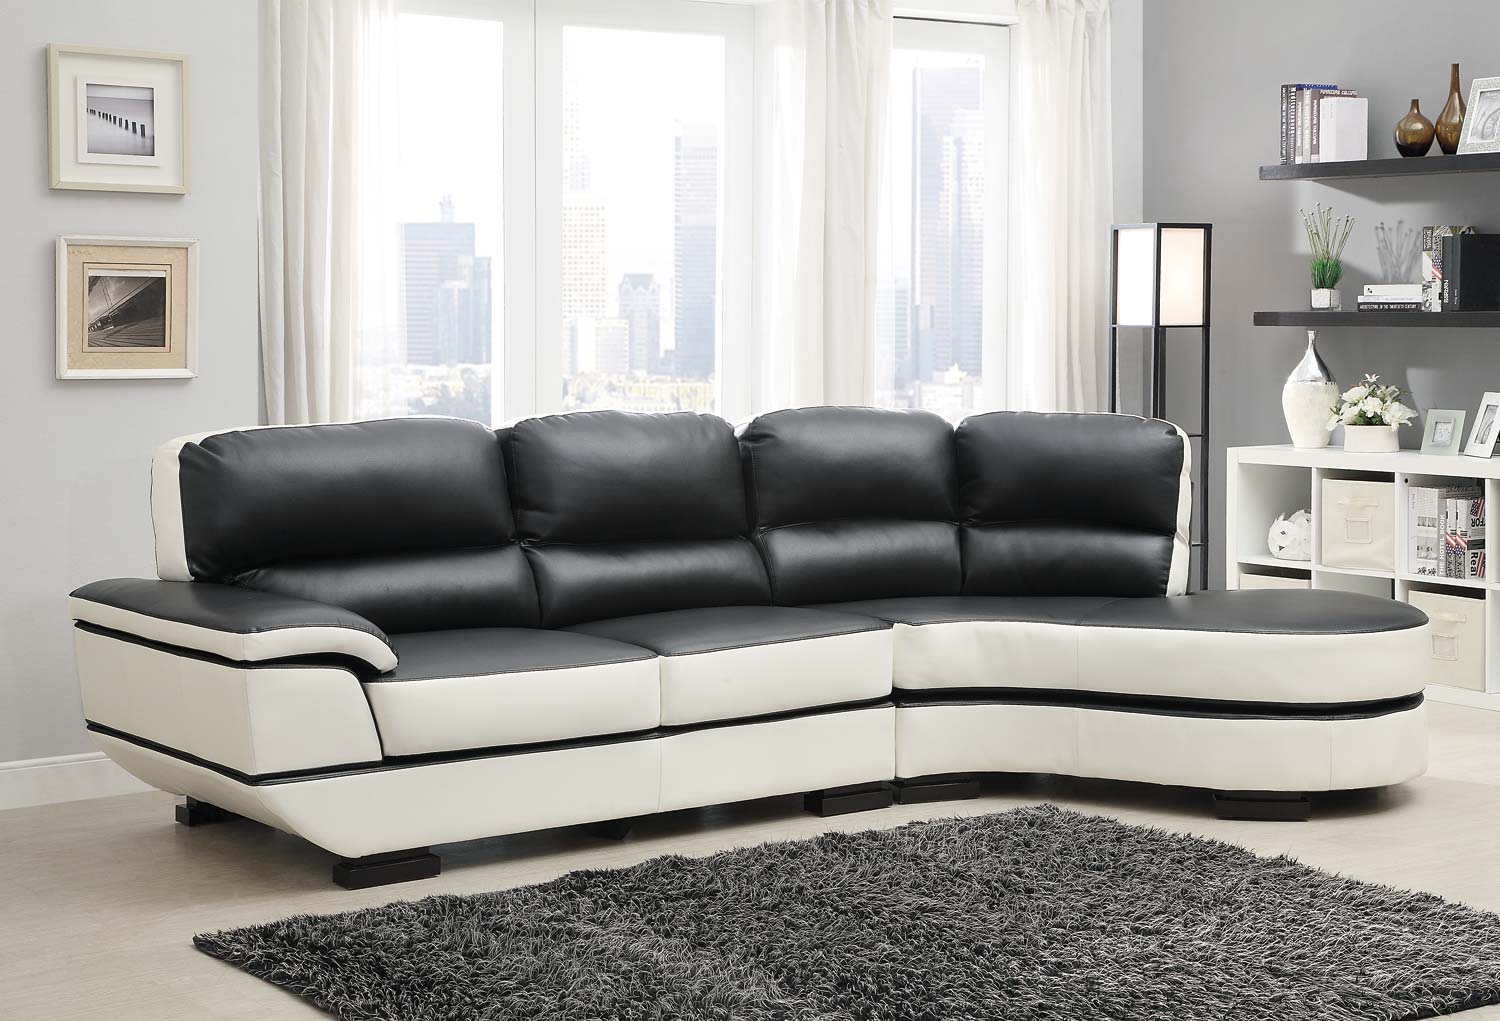 Homelegance Hanlon Sectional Sofa - Chocolate-White - All Bonded Leather